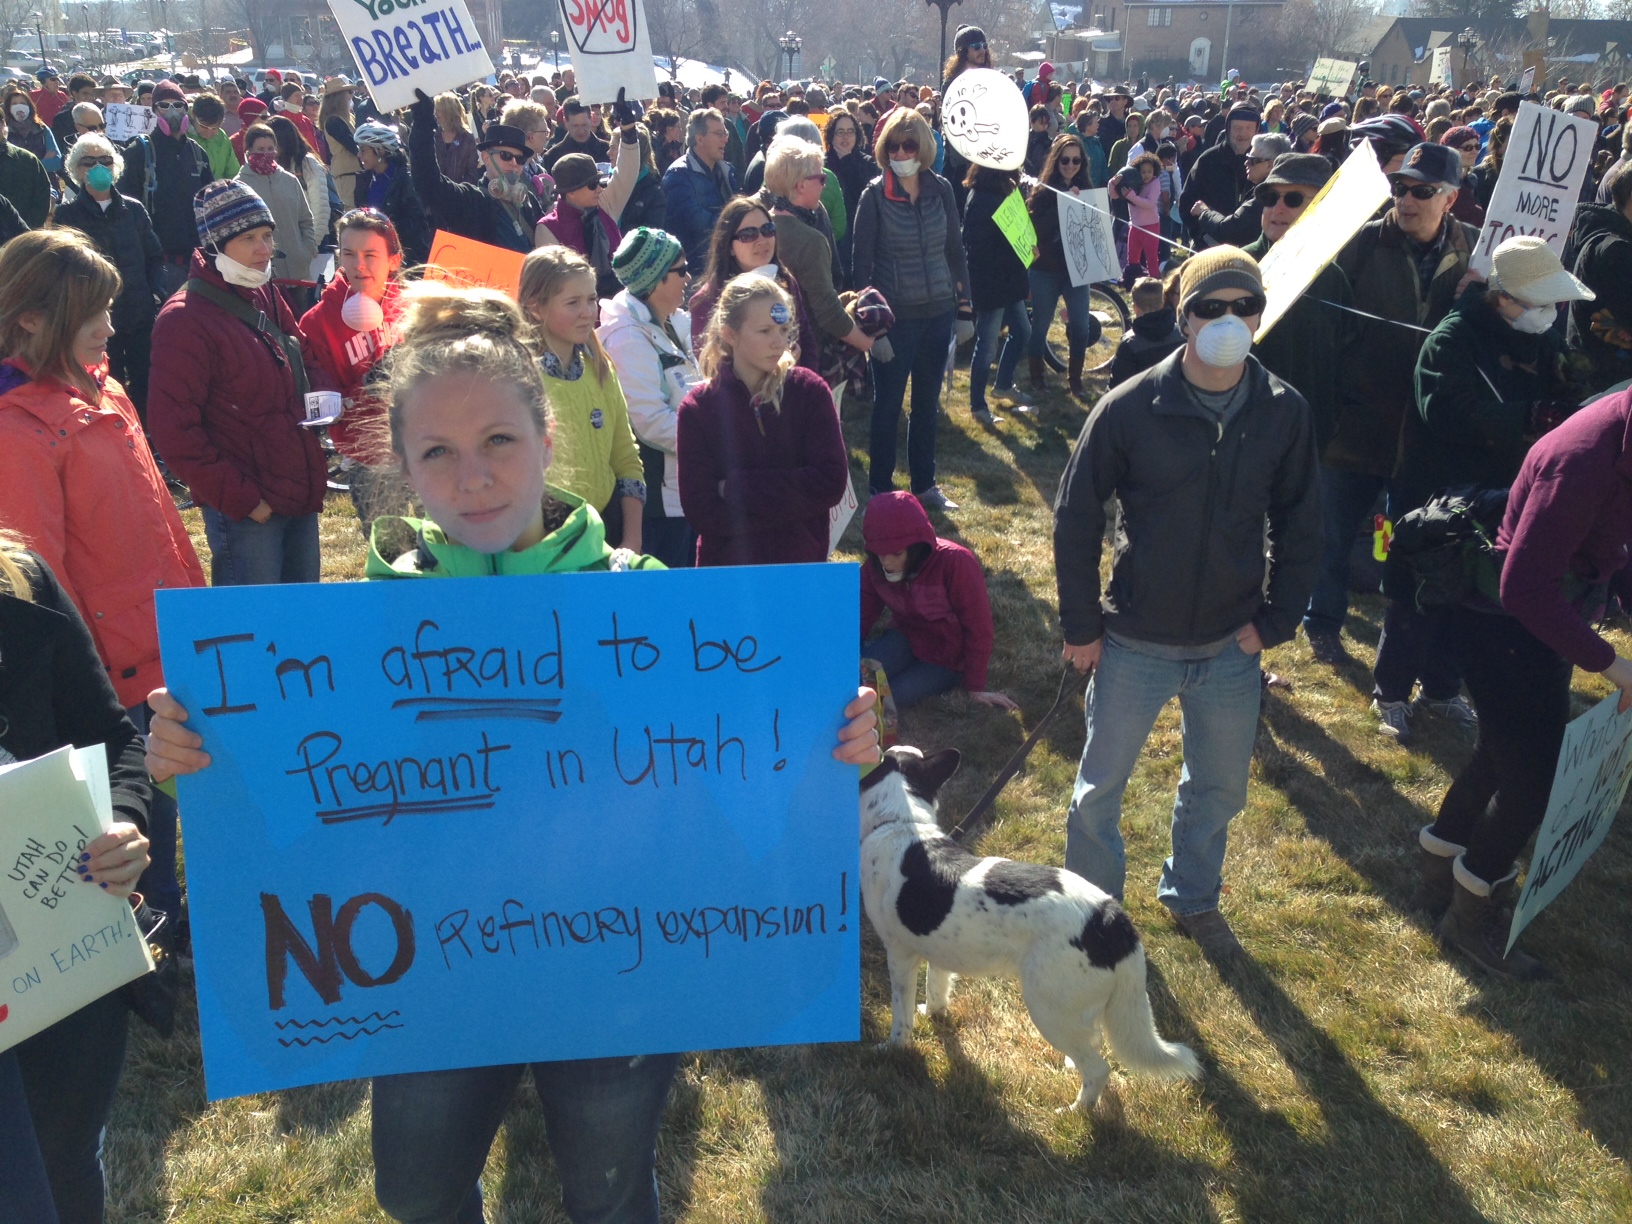 An attendee to the "Clean Air, No Excuses" rally holds her sign in the crowd.